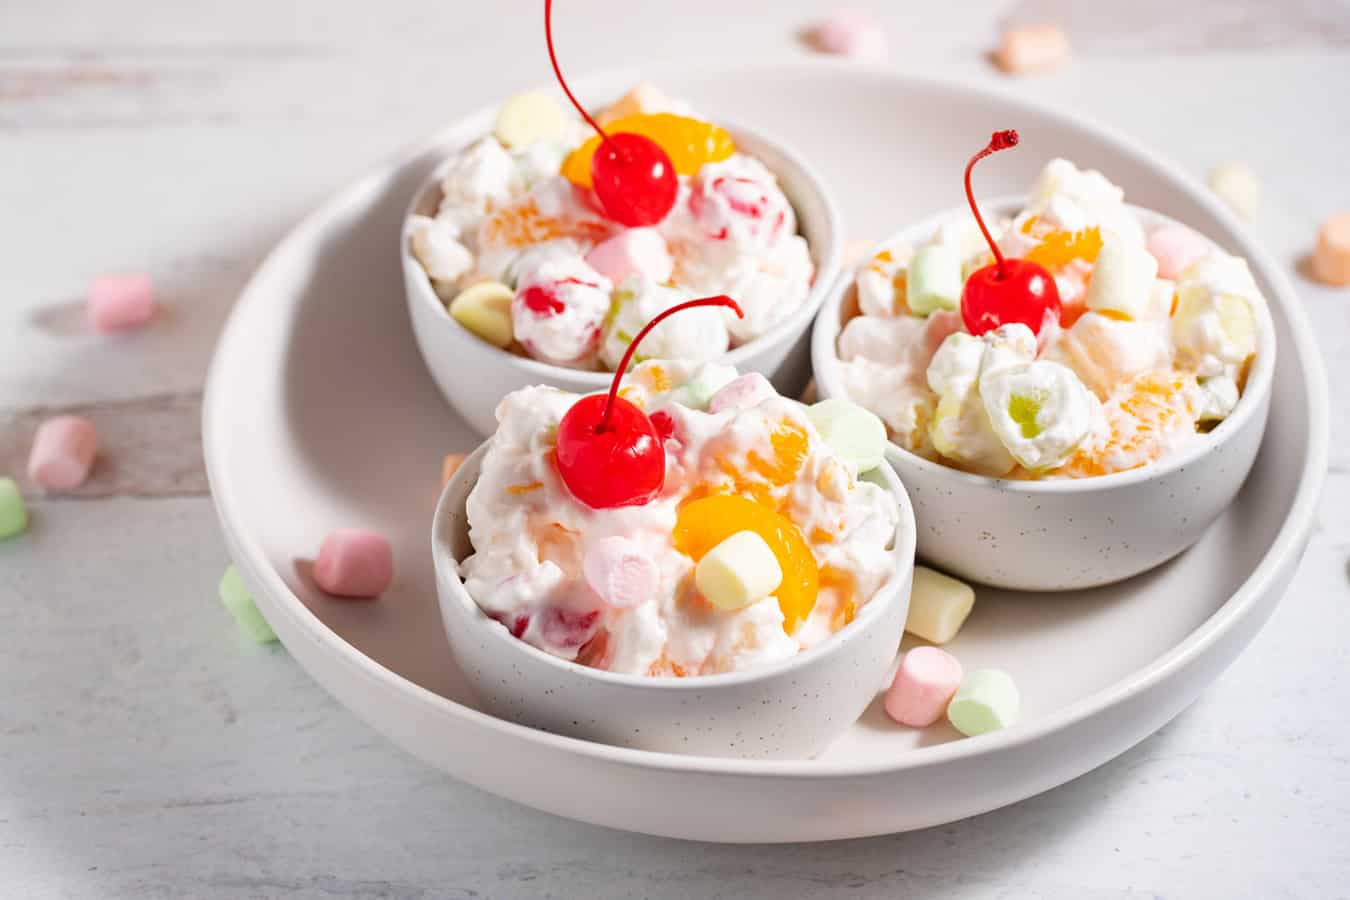 3 serving bowls of ambrosia salad with a cherry on top